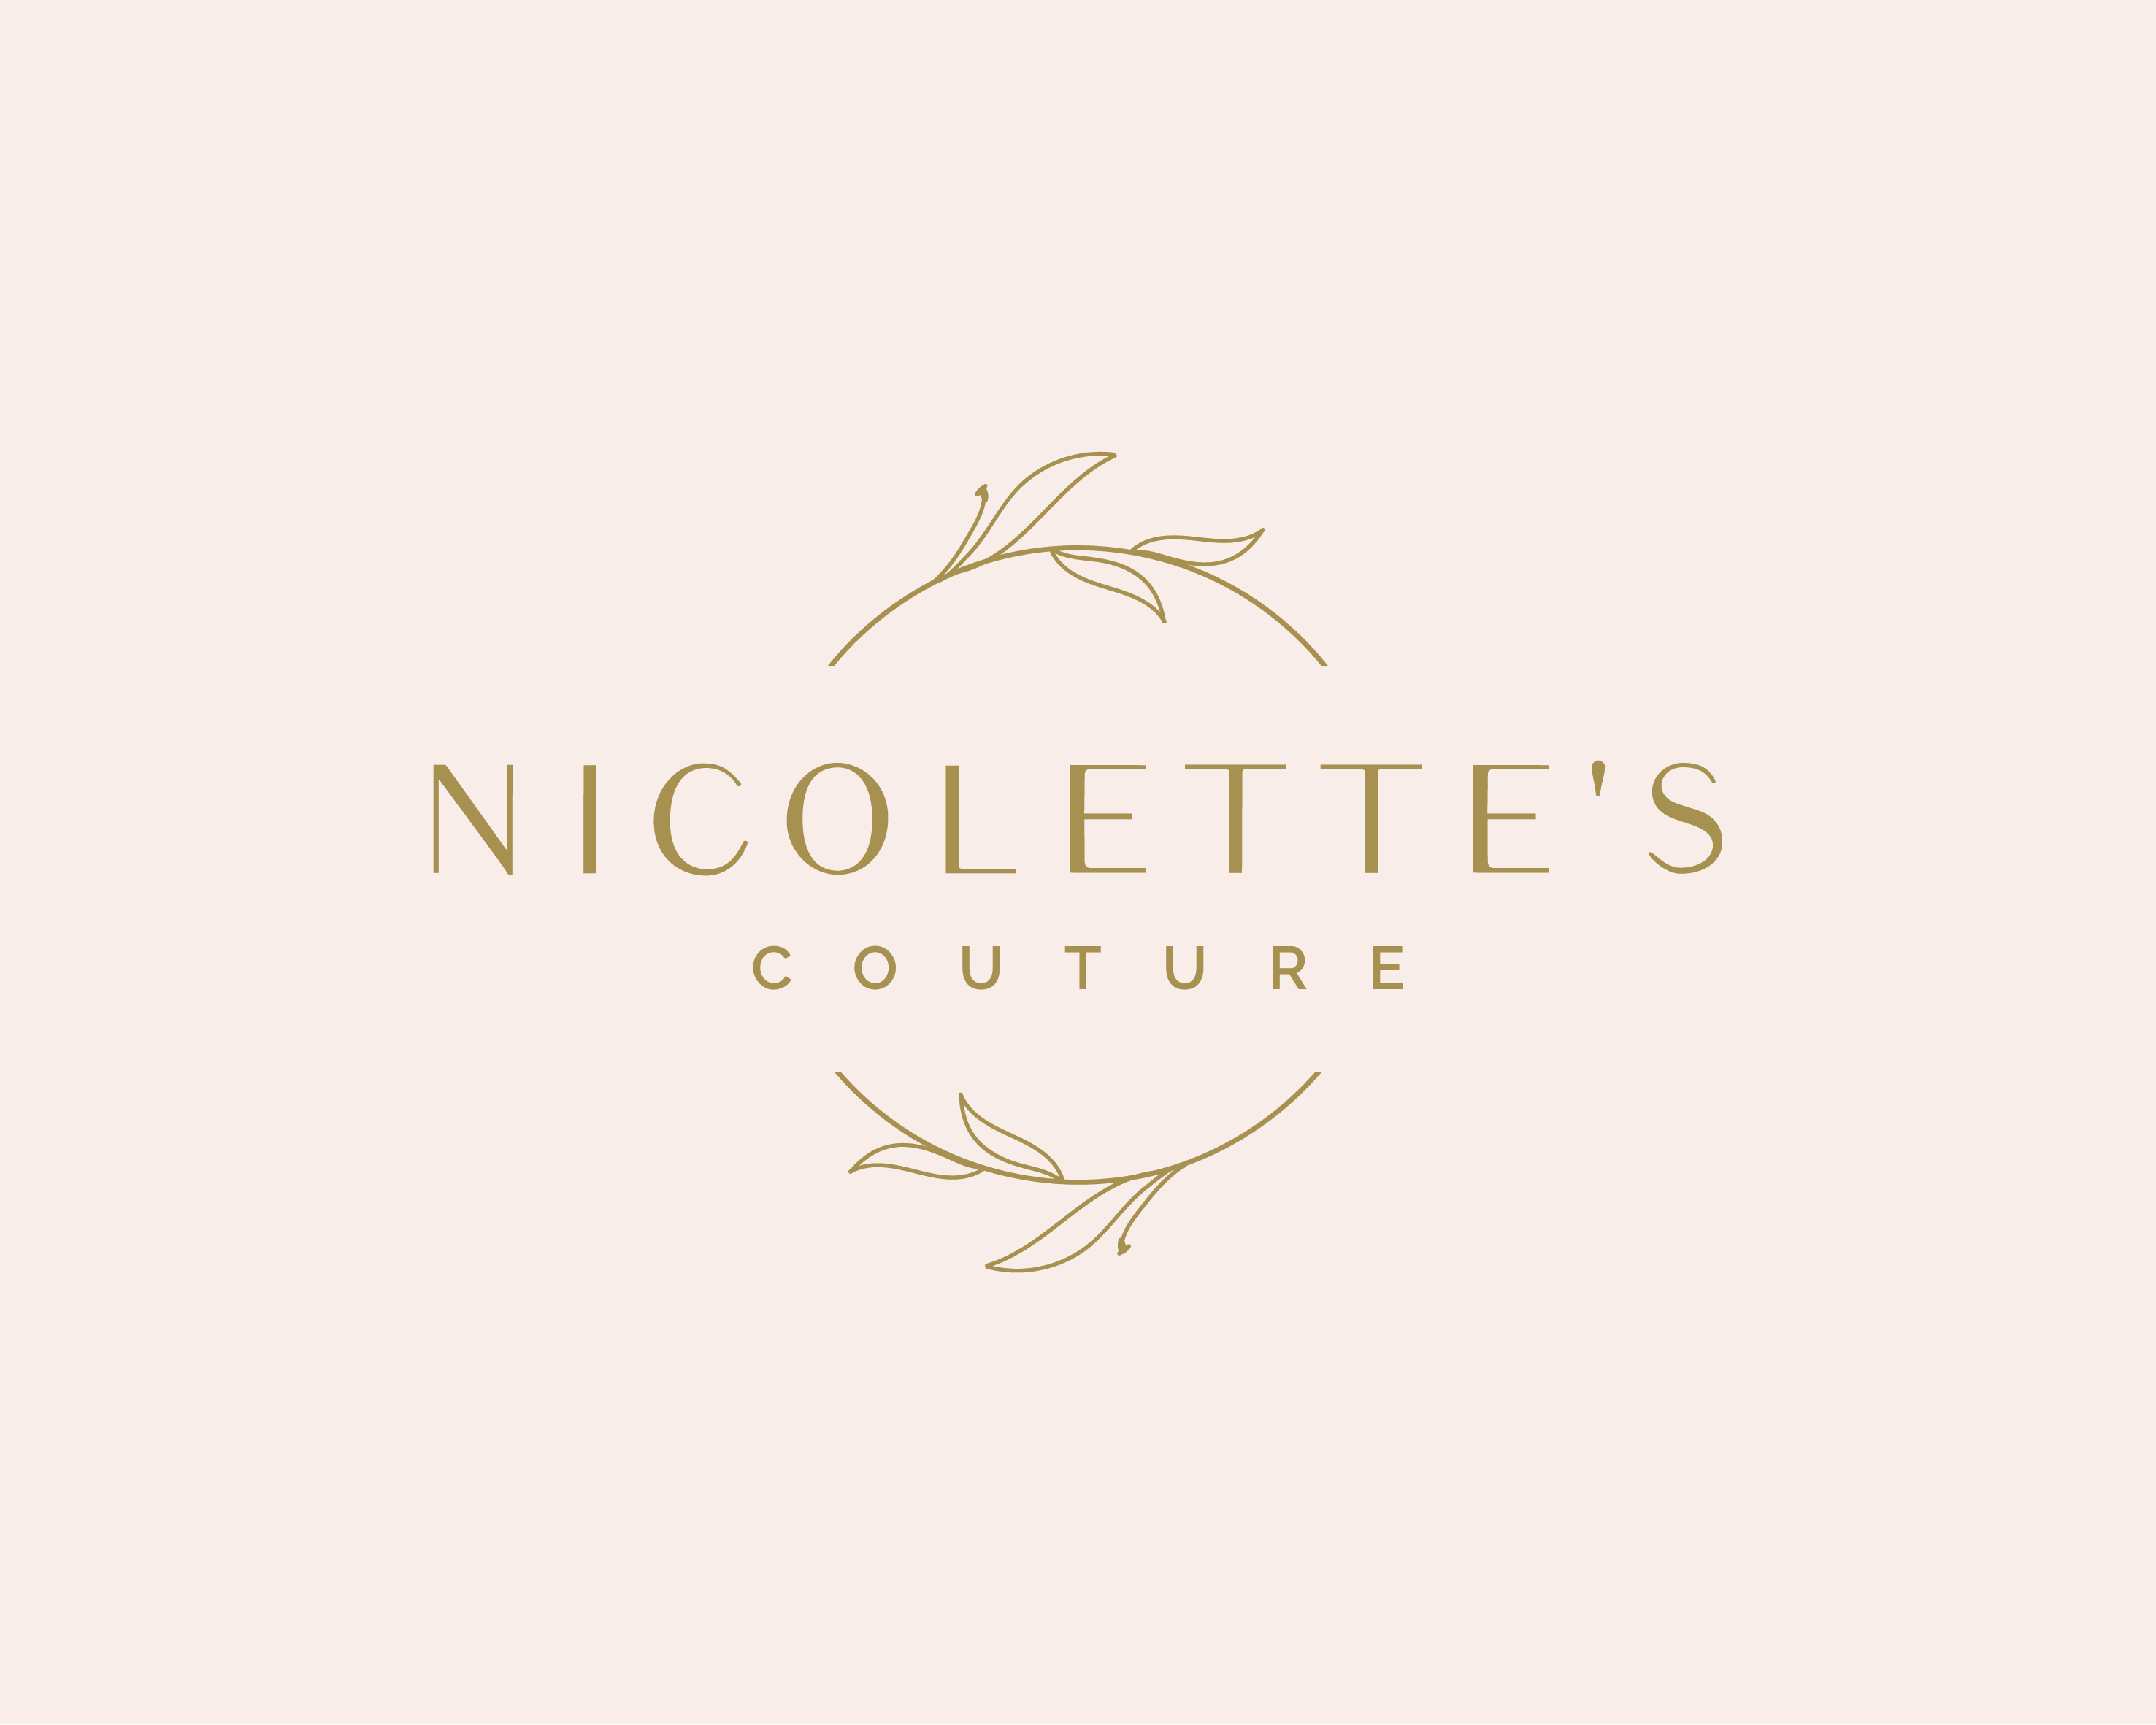 Girls Clothing And Accessories By Nicolette's Couture